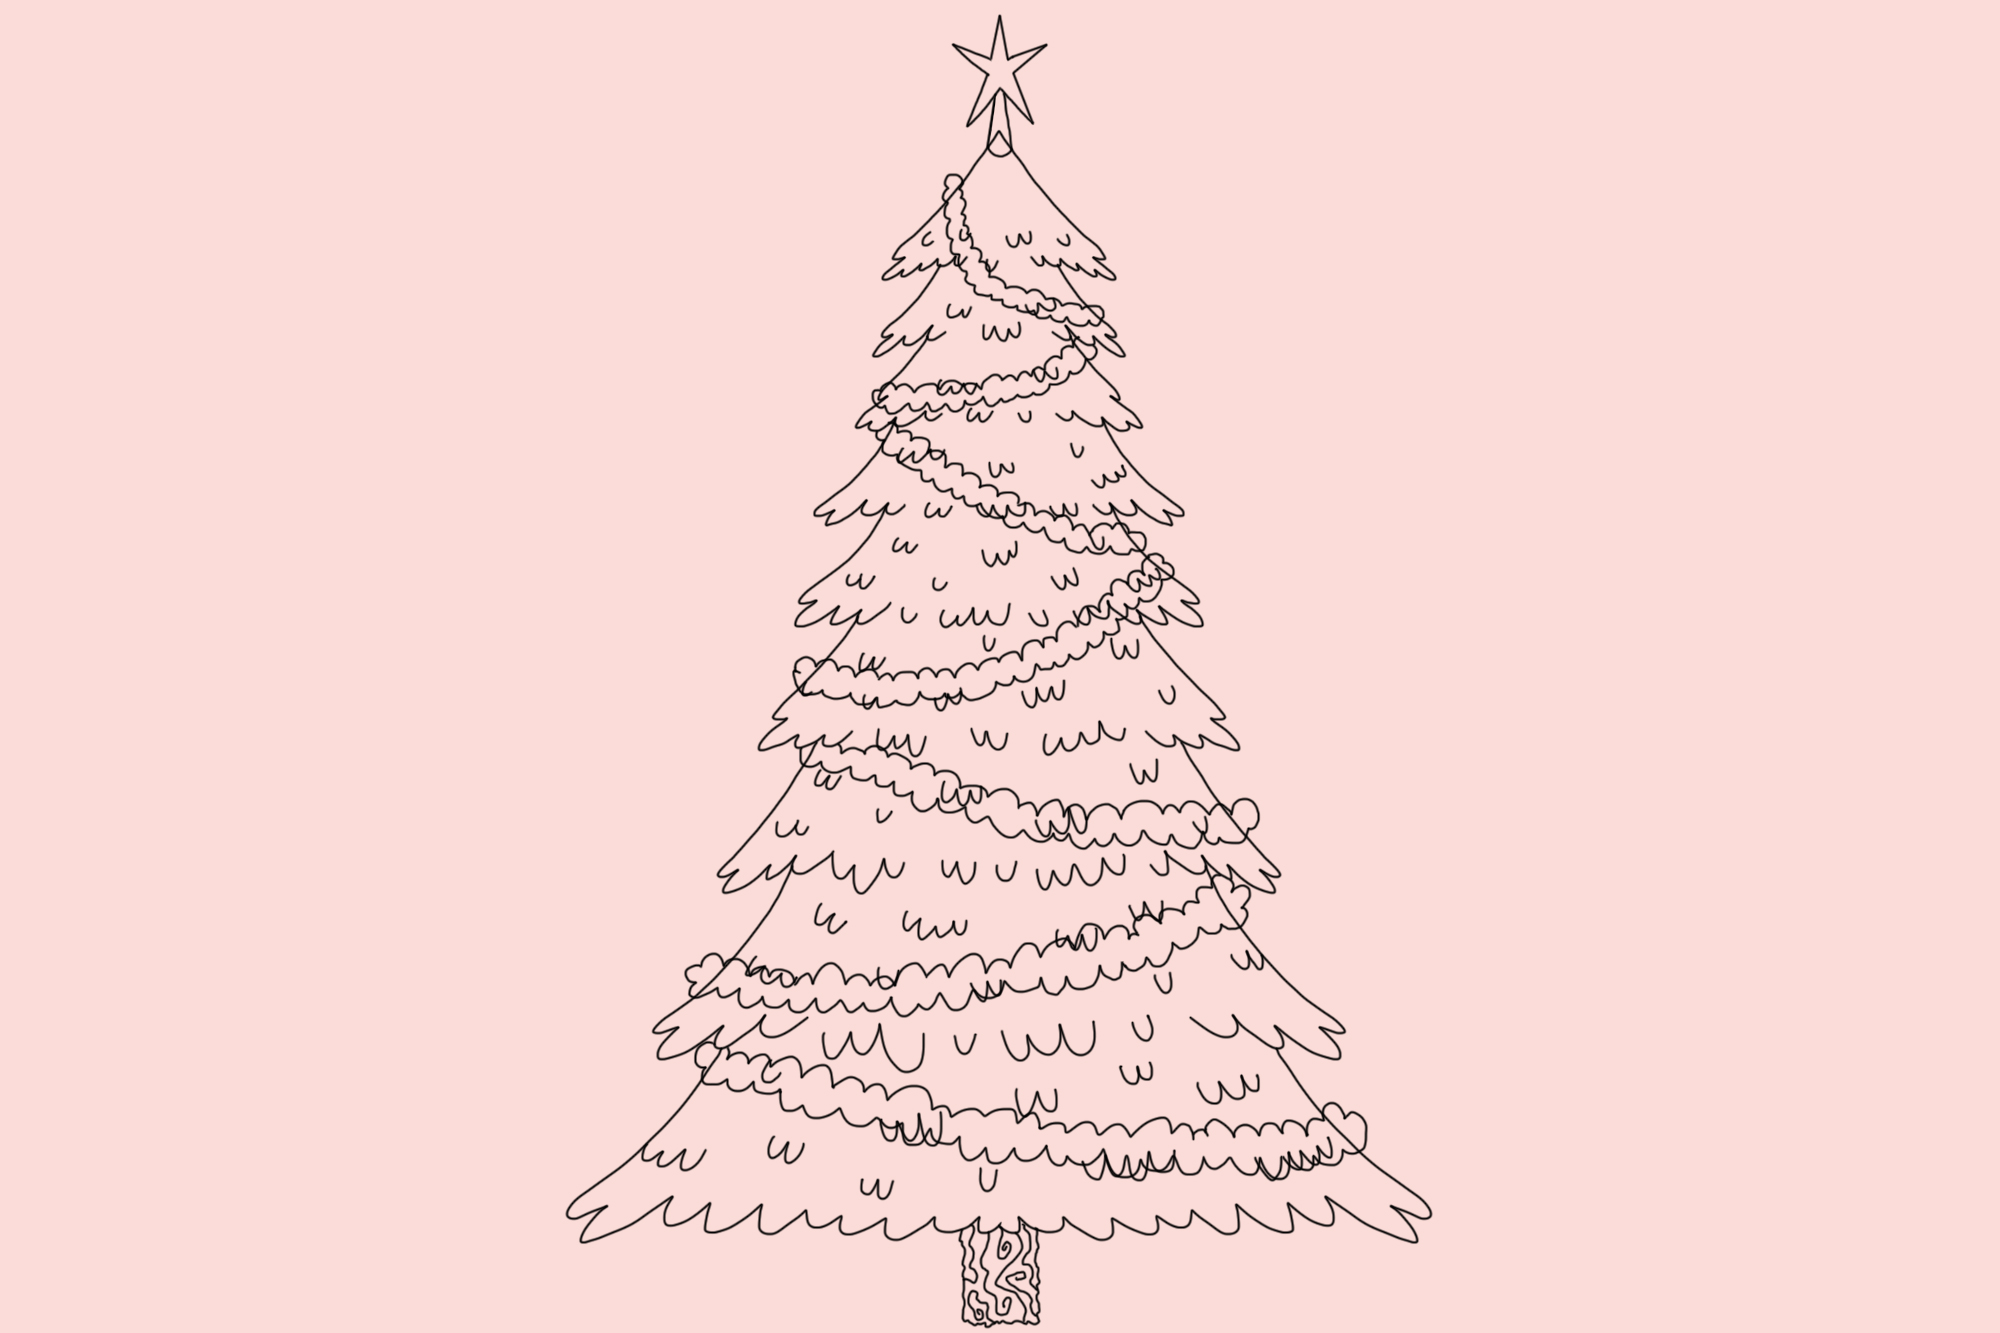 Christmas Tree Drawing: From Easy to Awesome!